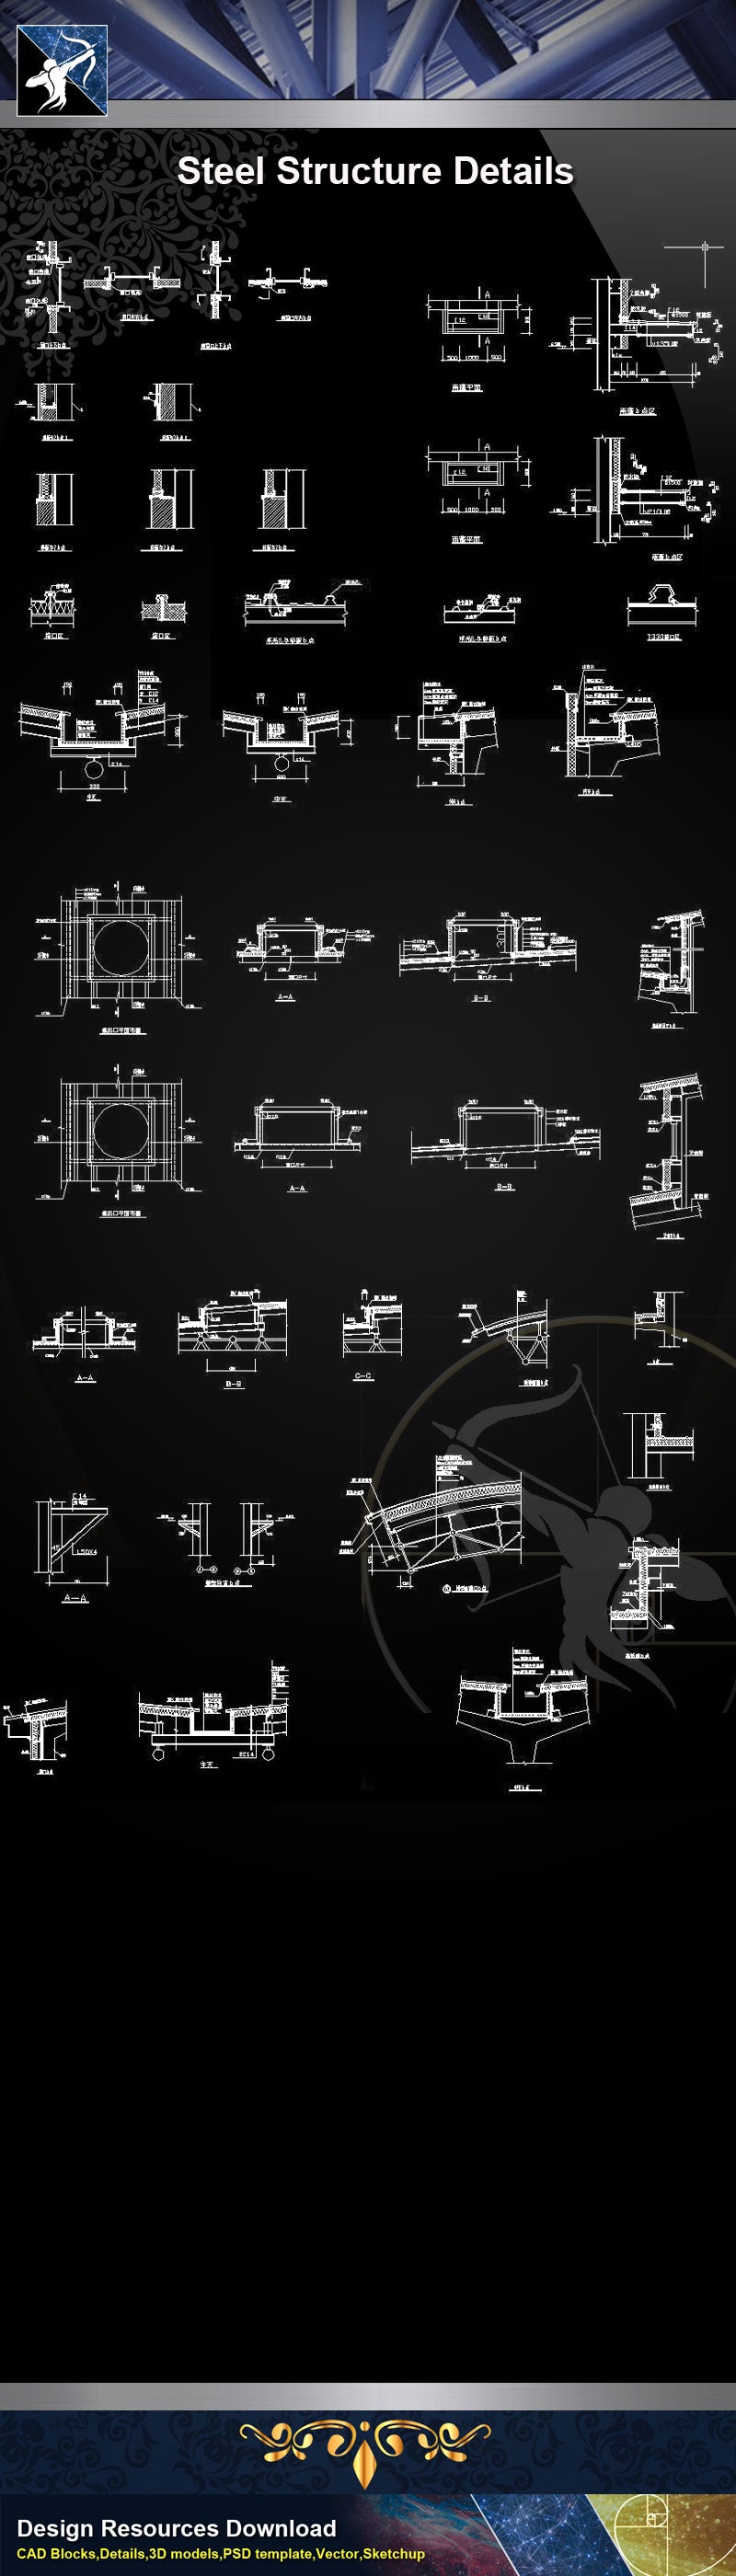 【Steel Structure Details】Steel Structure Details Collection V.2